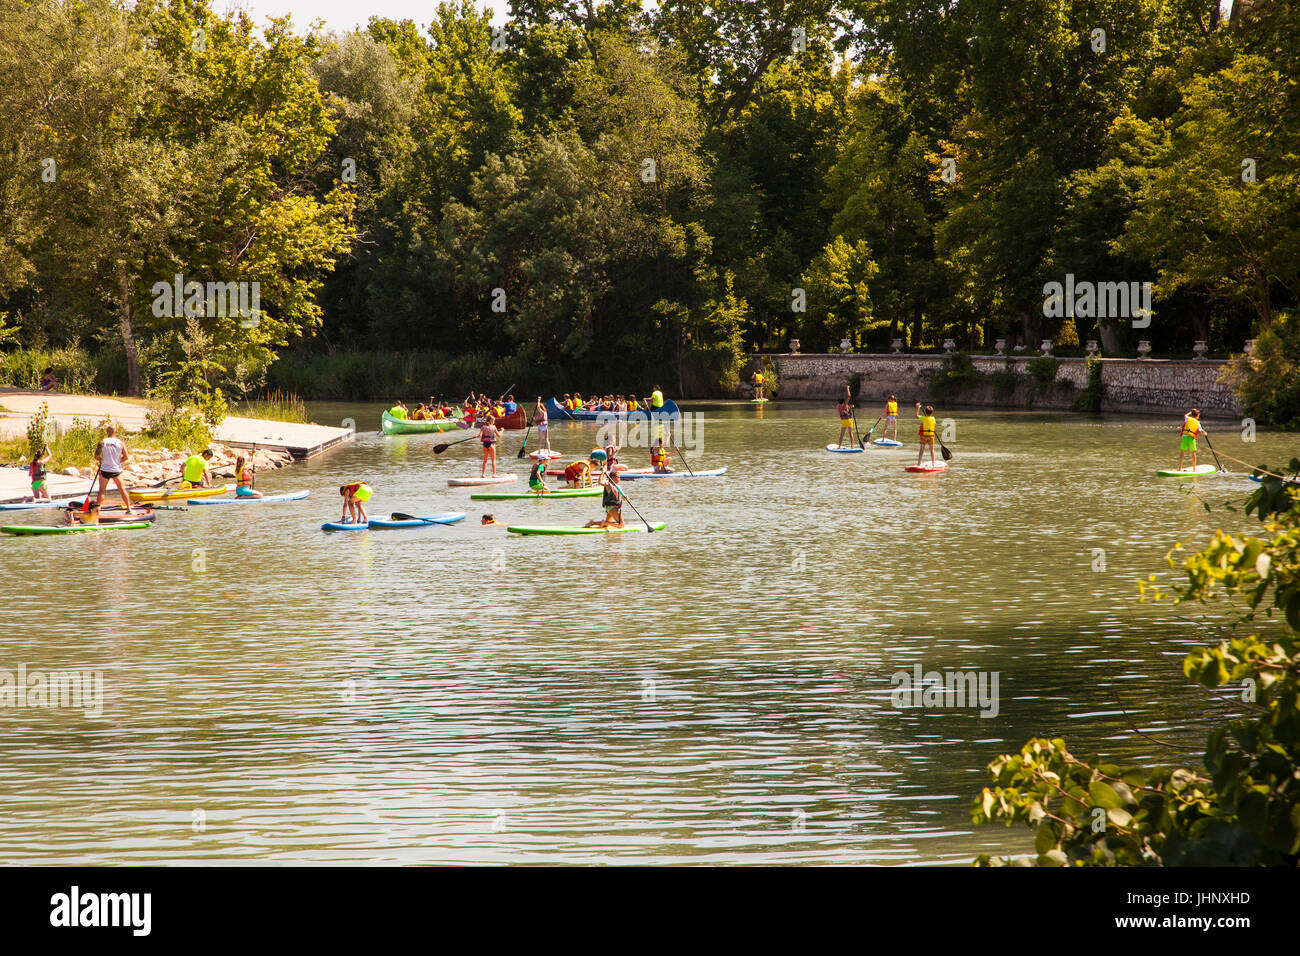 Children learning  paddle boarding  on the River Tagus / Tajo as it flows through the royal gardens in Aranjuez in the Madrid province of Spain Stock Photo